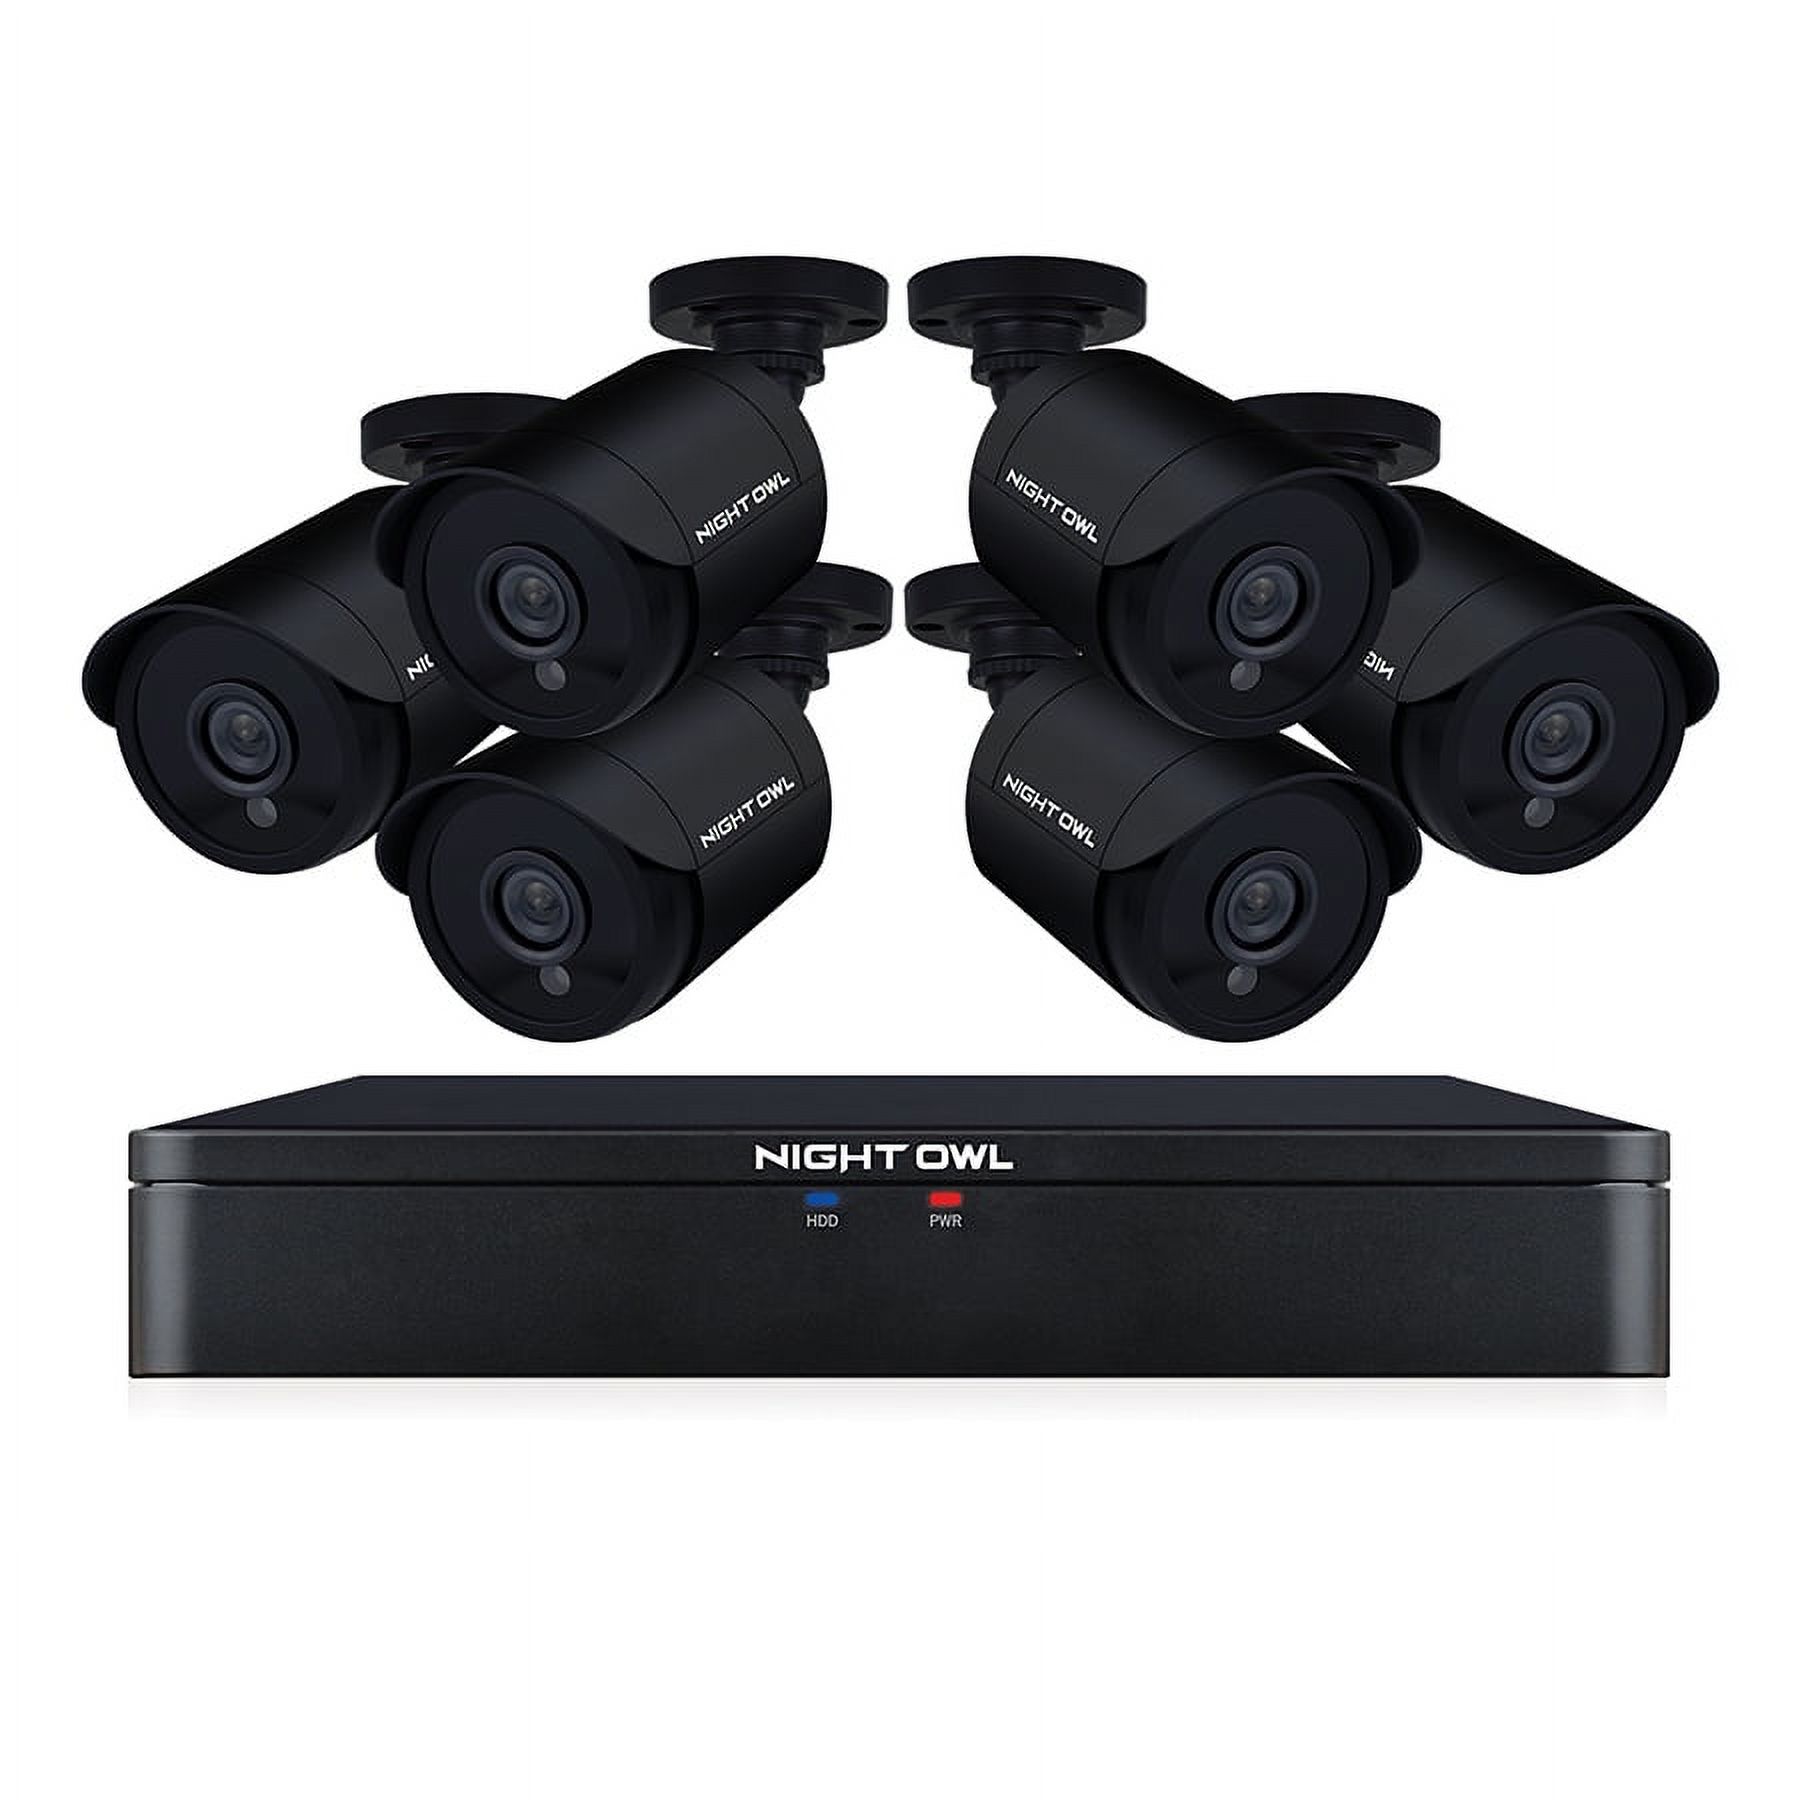 Night Owl's 8 CH 1080p HD Wired Video Security System with 6 Indoor/Outdoor Cameras, Human Detection Technology and a 1TB Pre-Installed Hard Drive - image 2 of 7